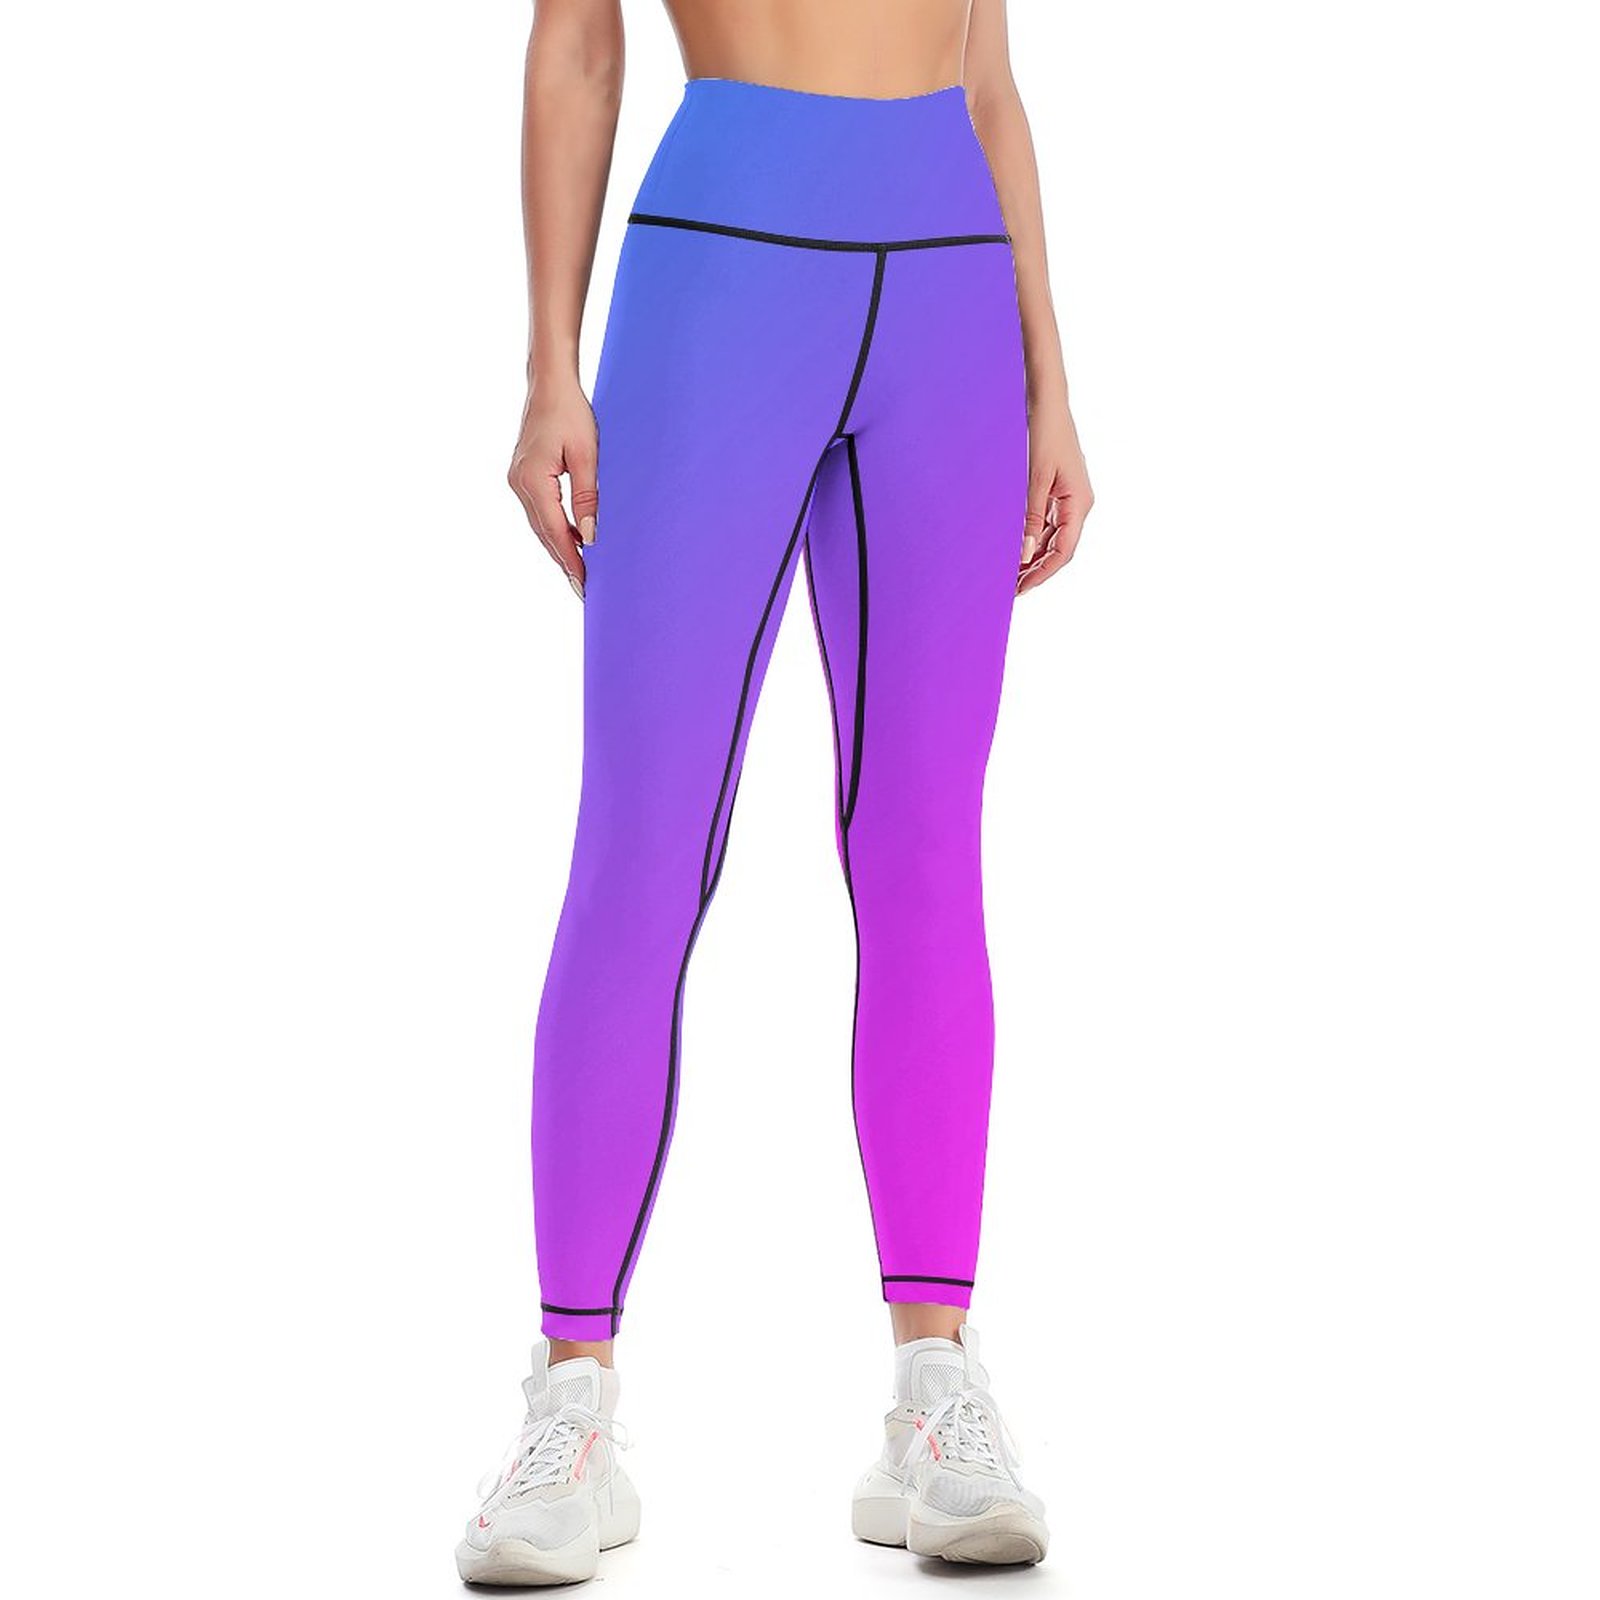 Is That The New Breathable Wideband Waist Sports Leggings ??